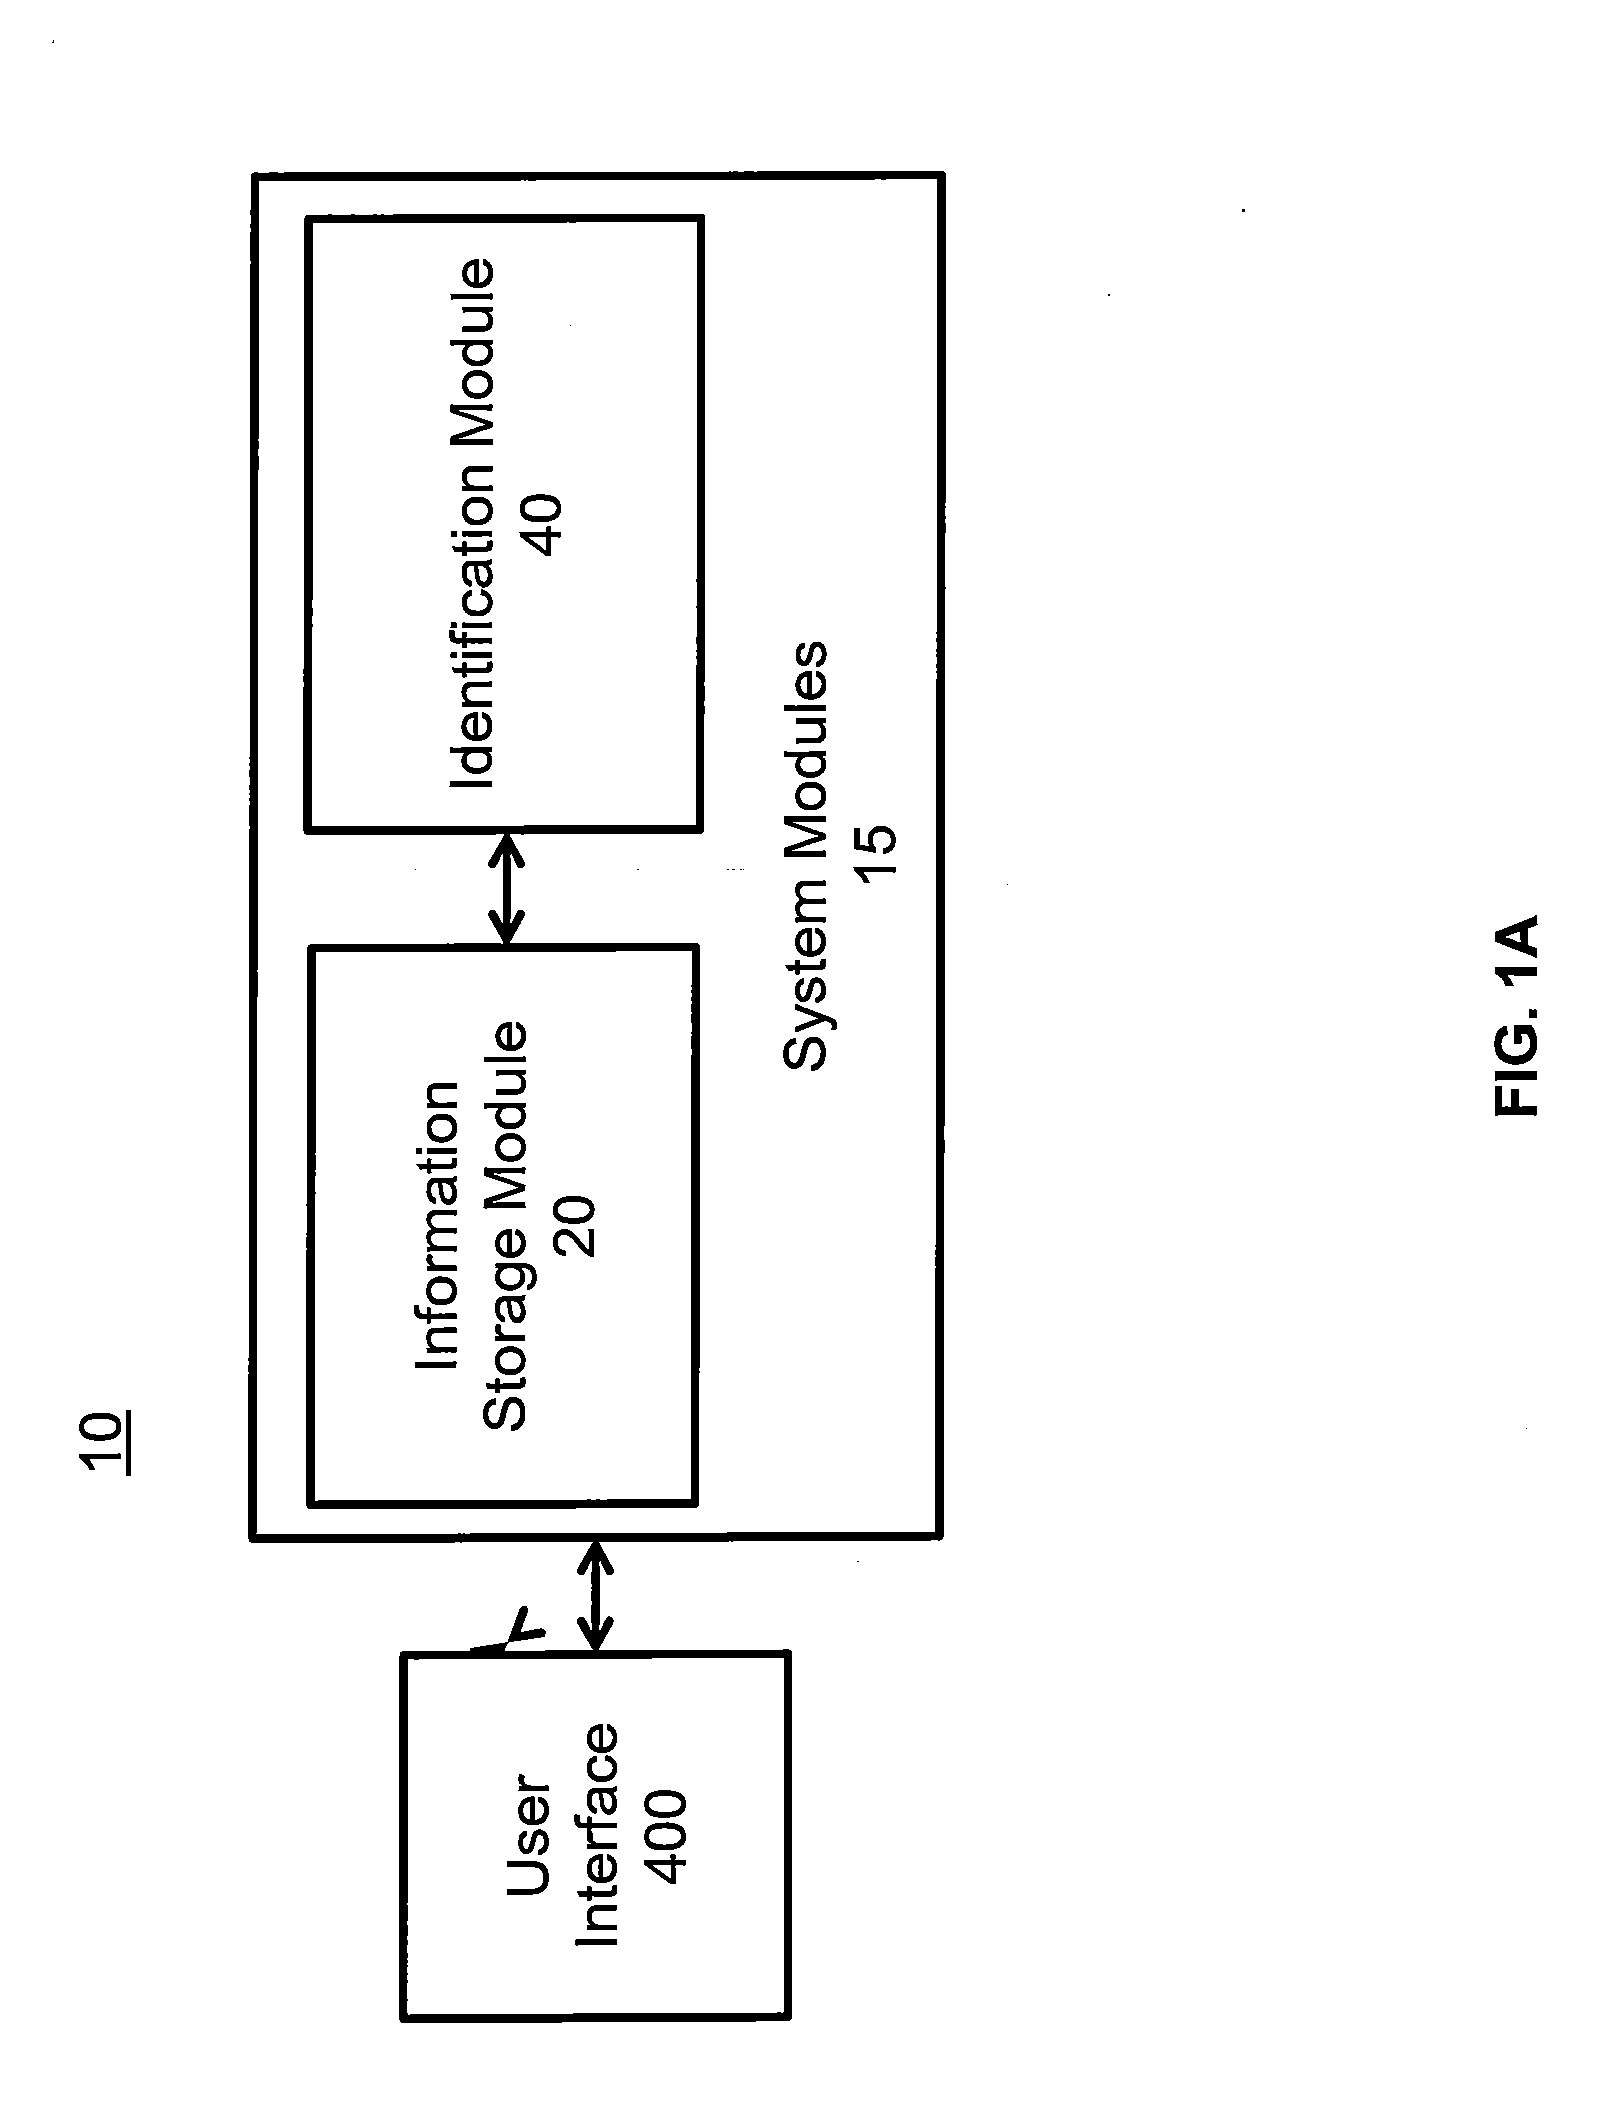 Systems and methods for identifying objects